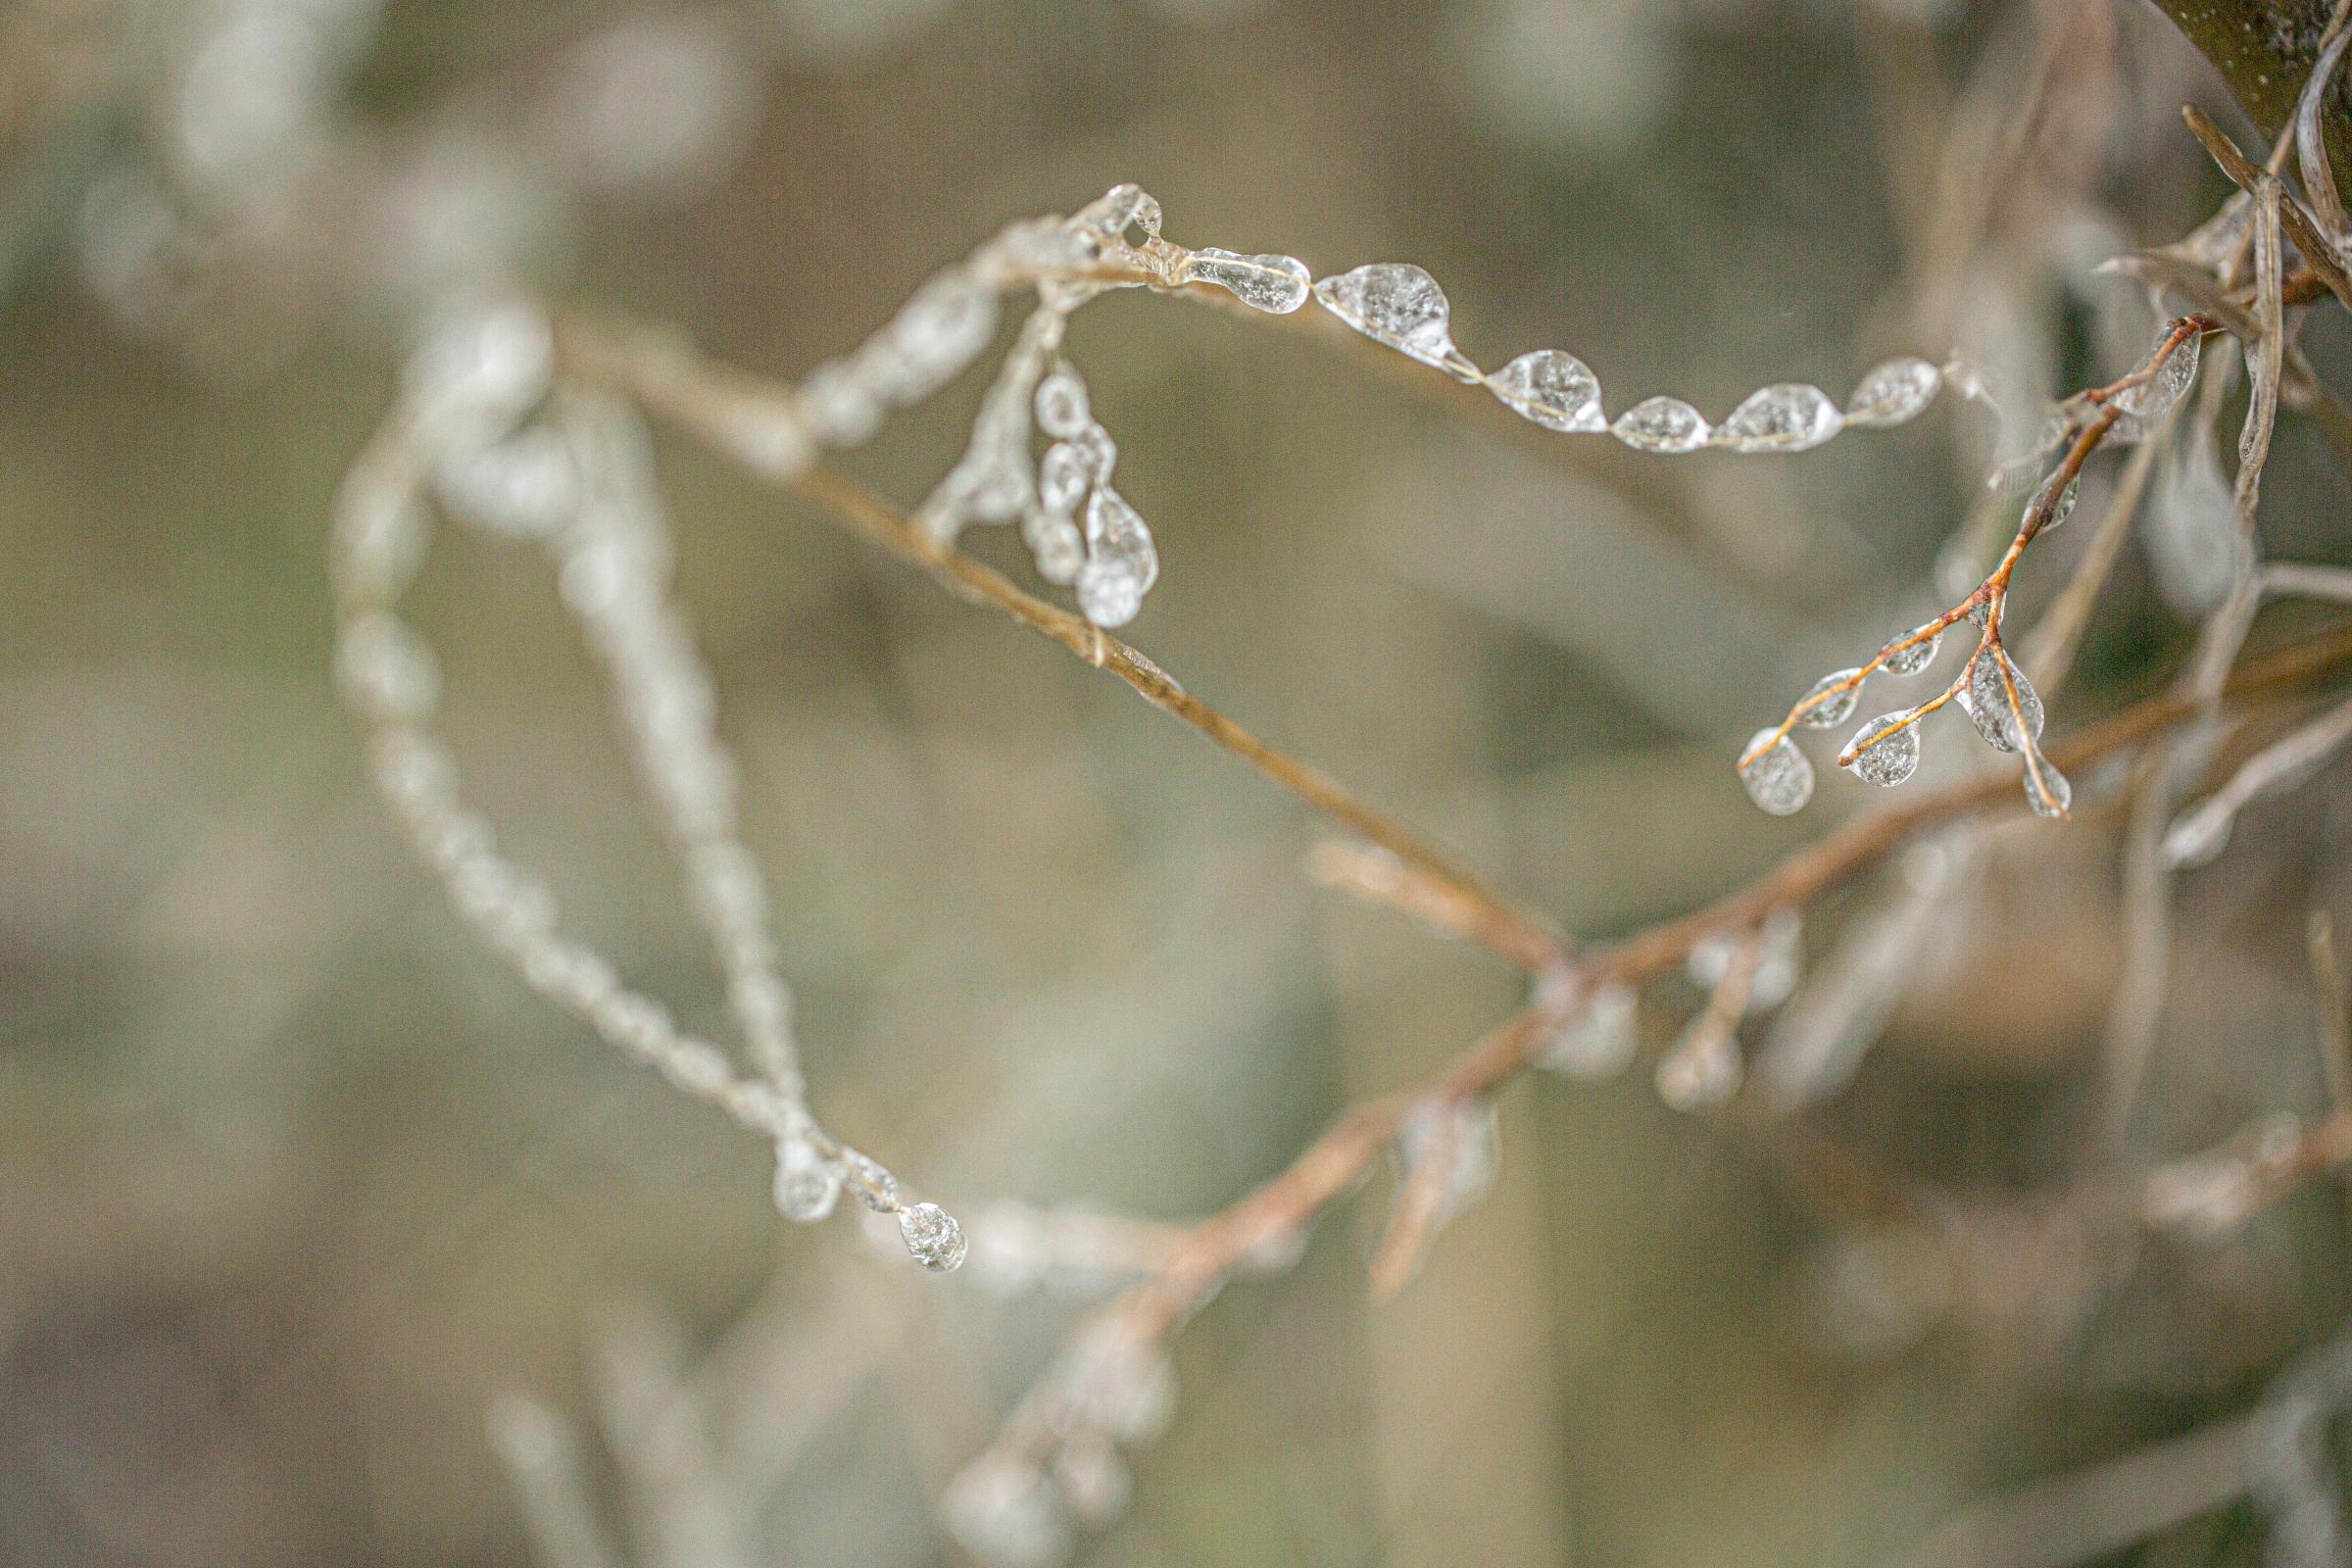 BEAUTY AS A WARNING   - Delicate nature as observed during a winter storm in Central Texas, February, 2023